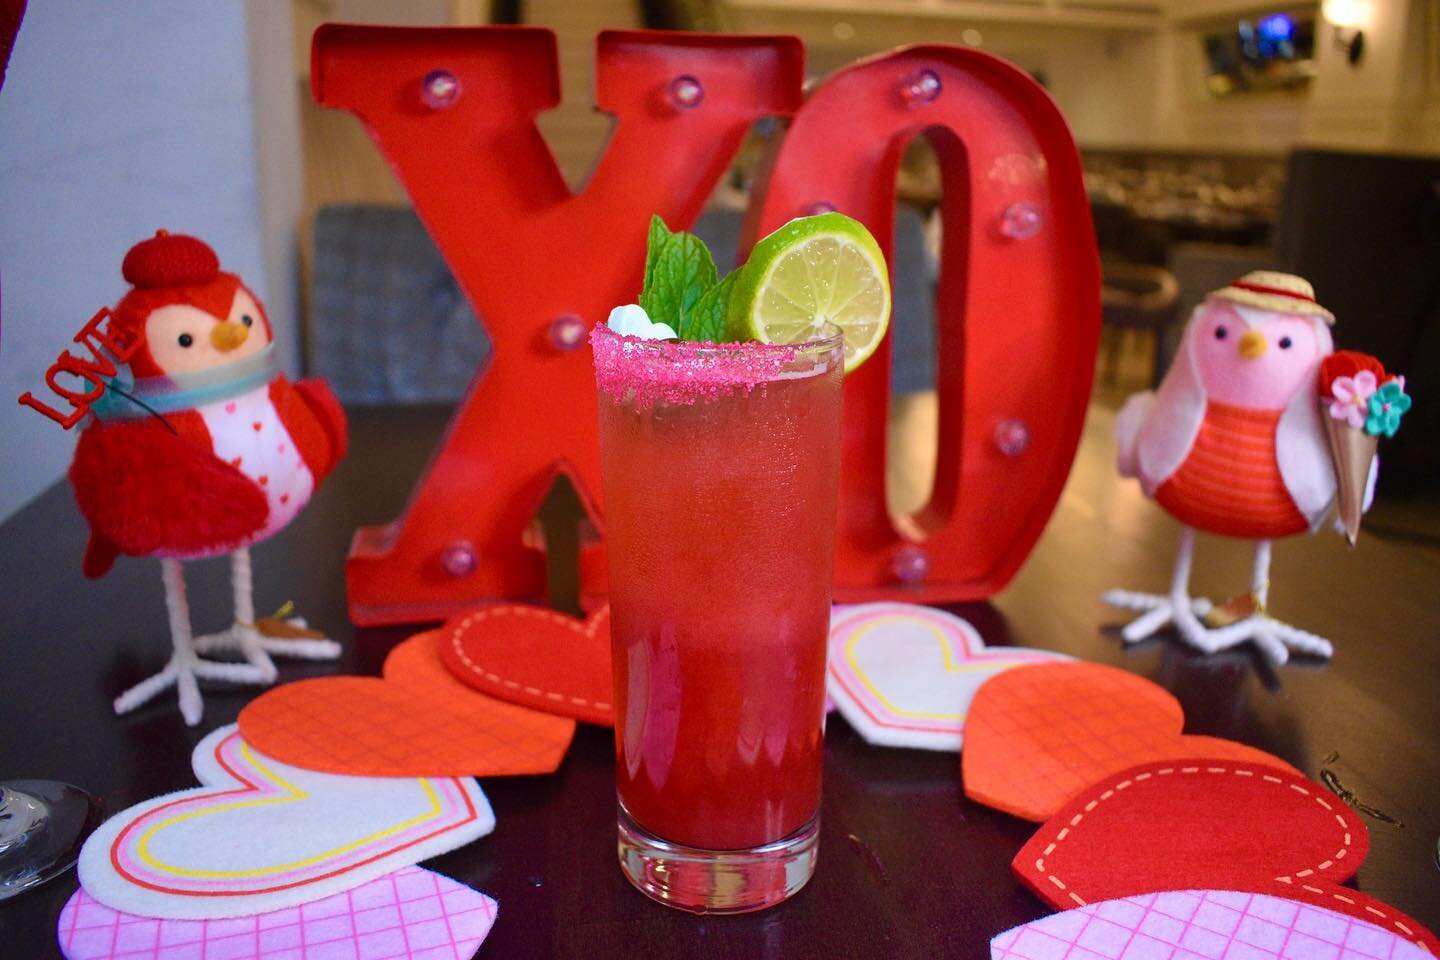 Happy Valentines Day!!! We still have some time slots available today for your special day ❤️ Give us a call to confirm your reservation 😊 213-488-1096  #10e #10erestaurant #dtla #dtlarestaurant #dtlafoodie #valentinesday #valentinesdaycocktail #arm